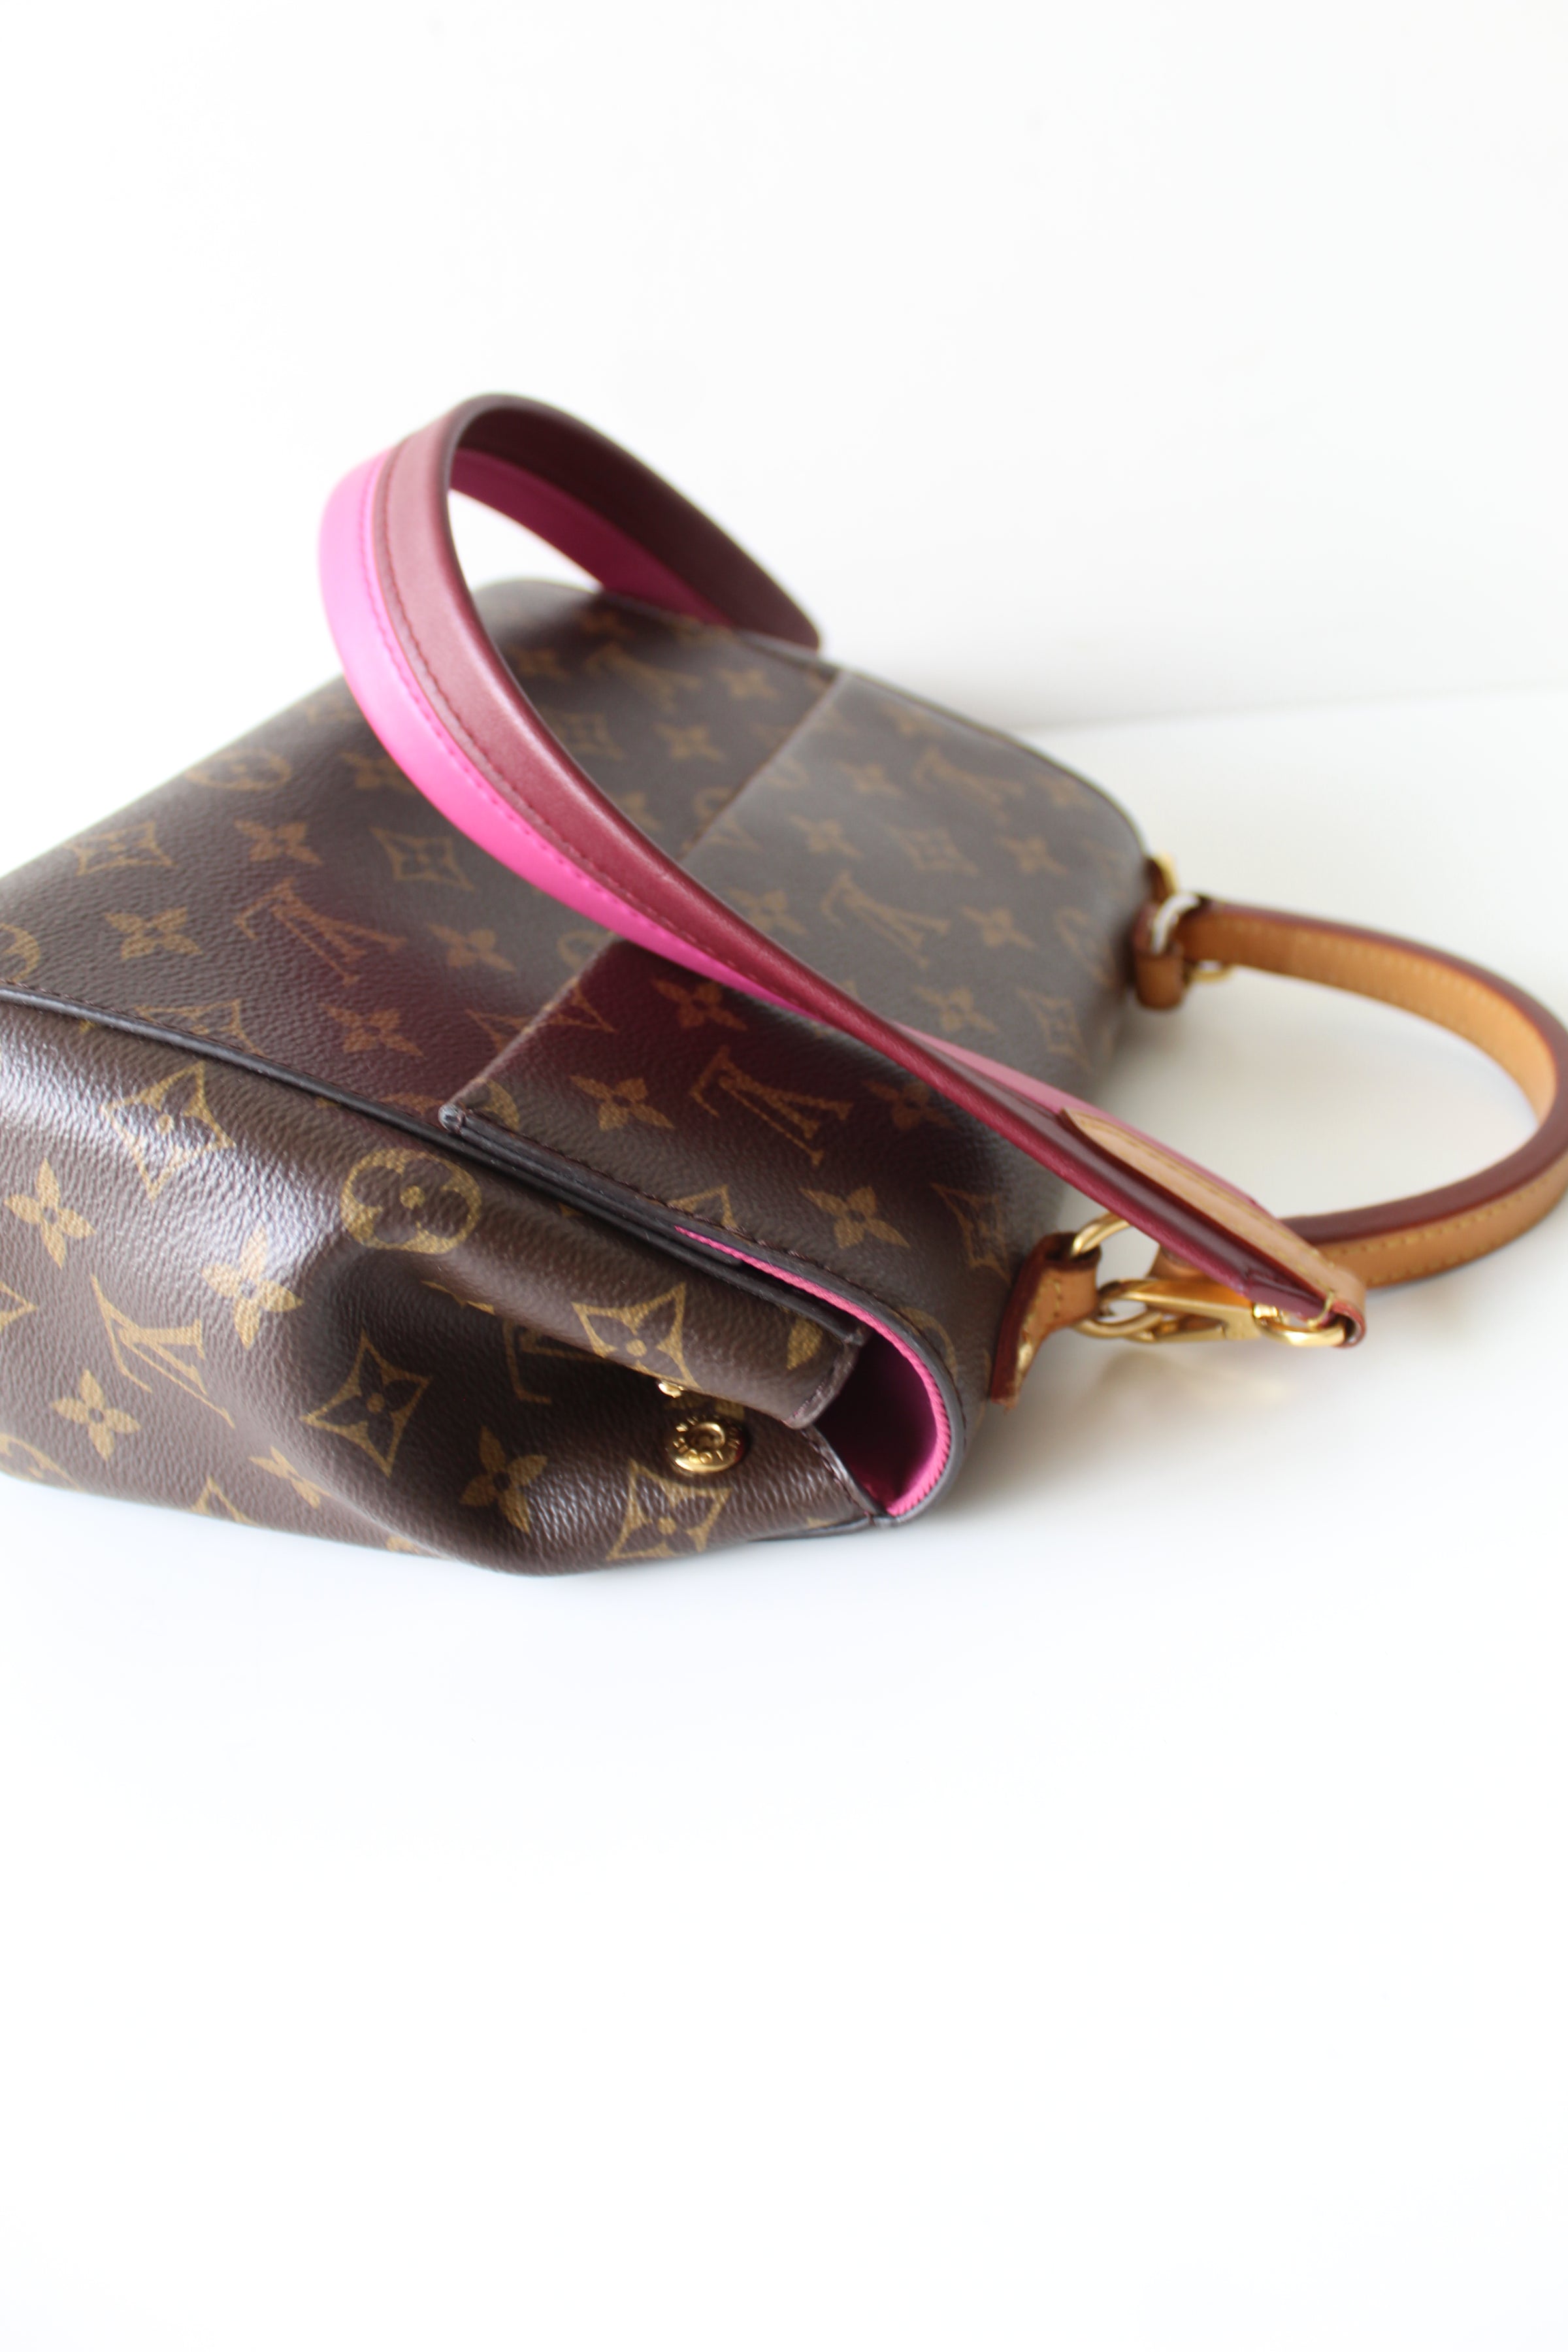 Vuitton Cluny - 6 For Sale on 1stDibs